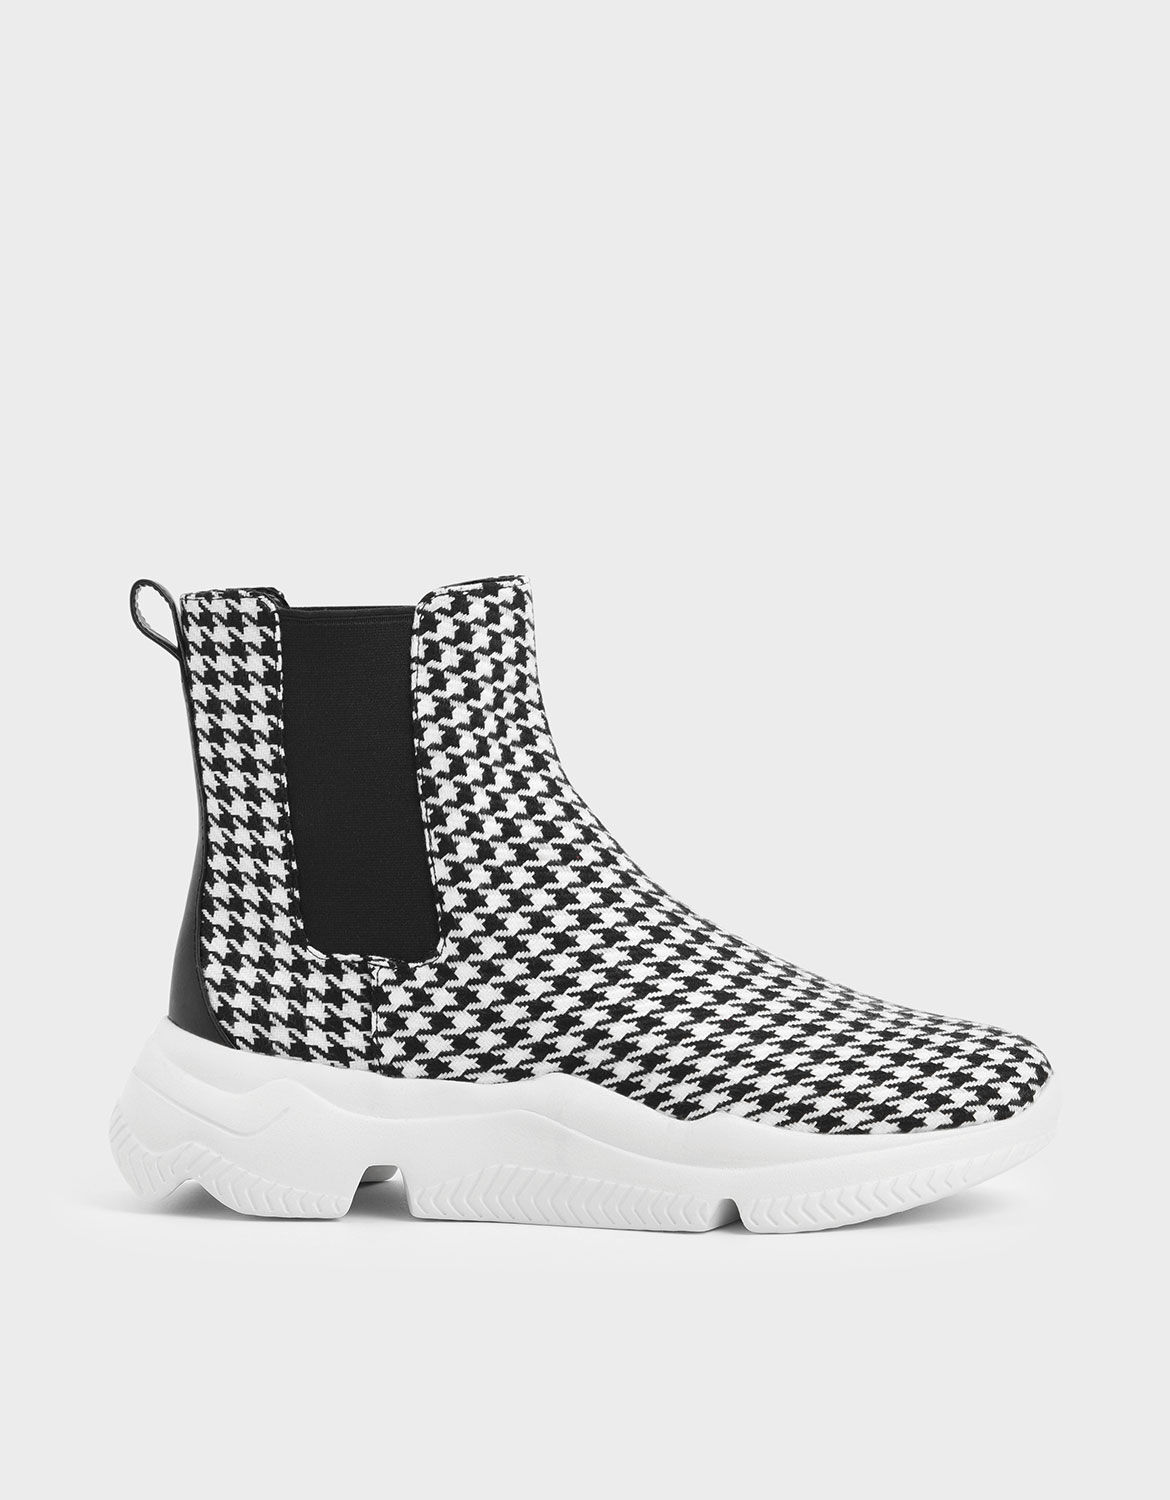 houndstooth boots